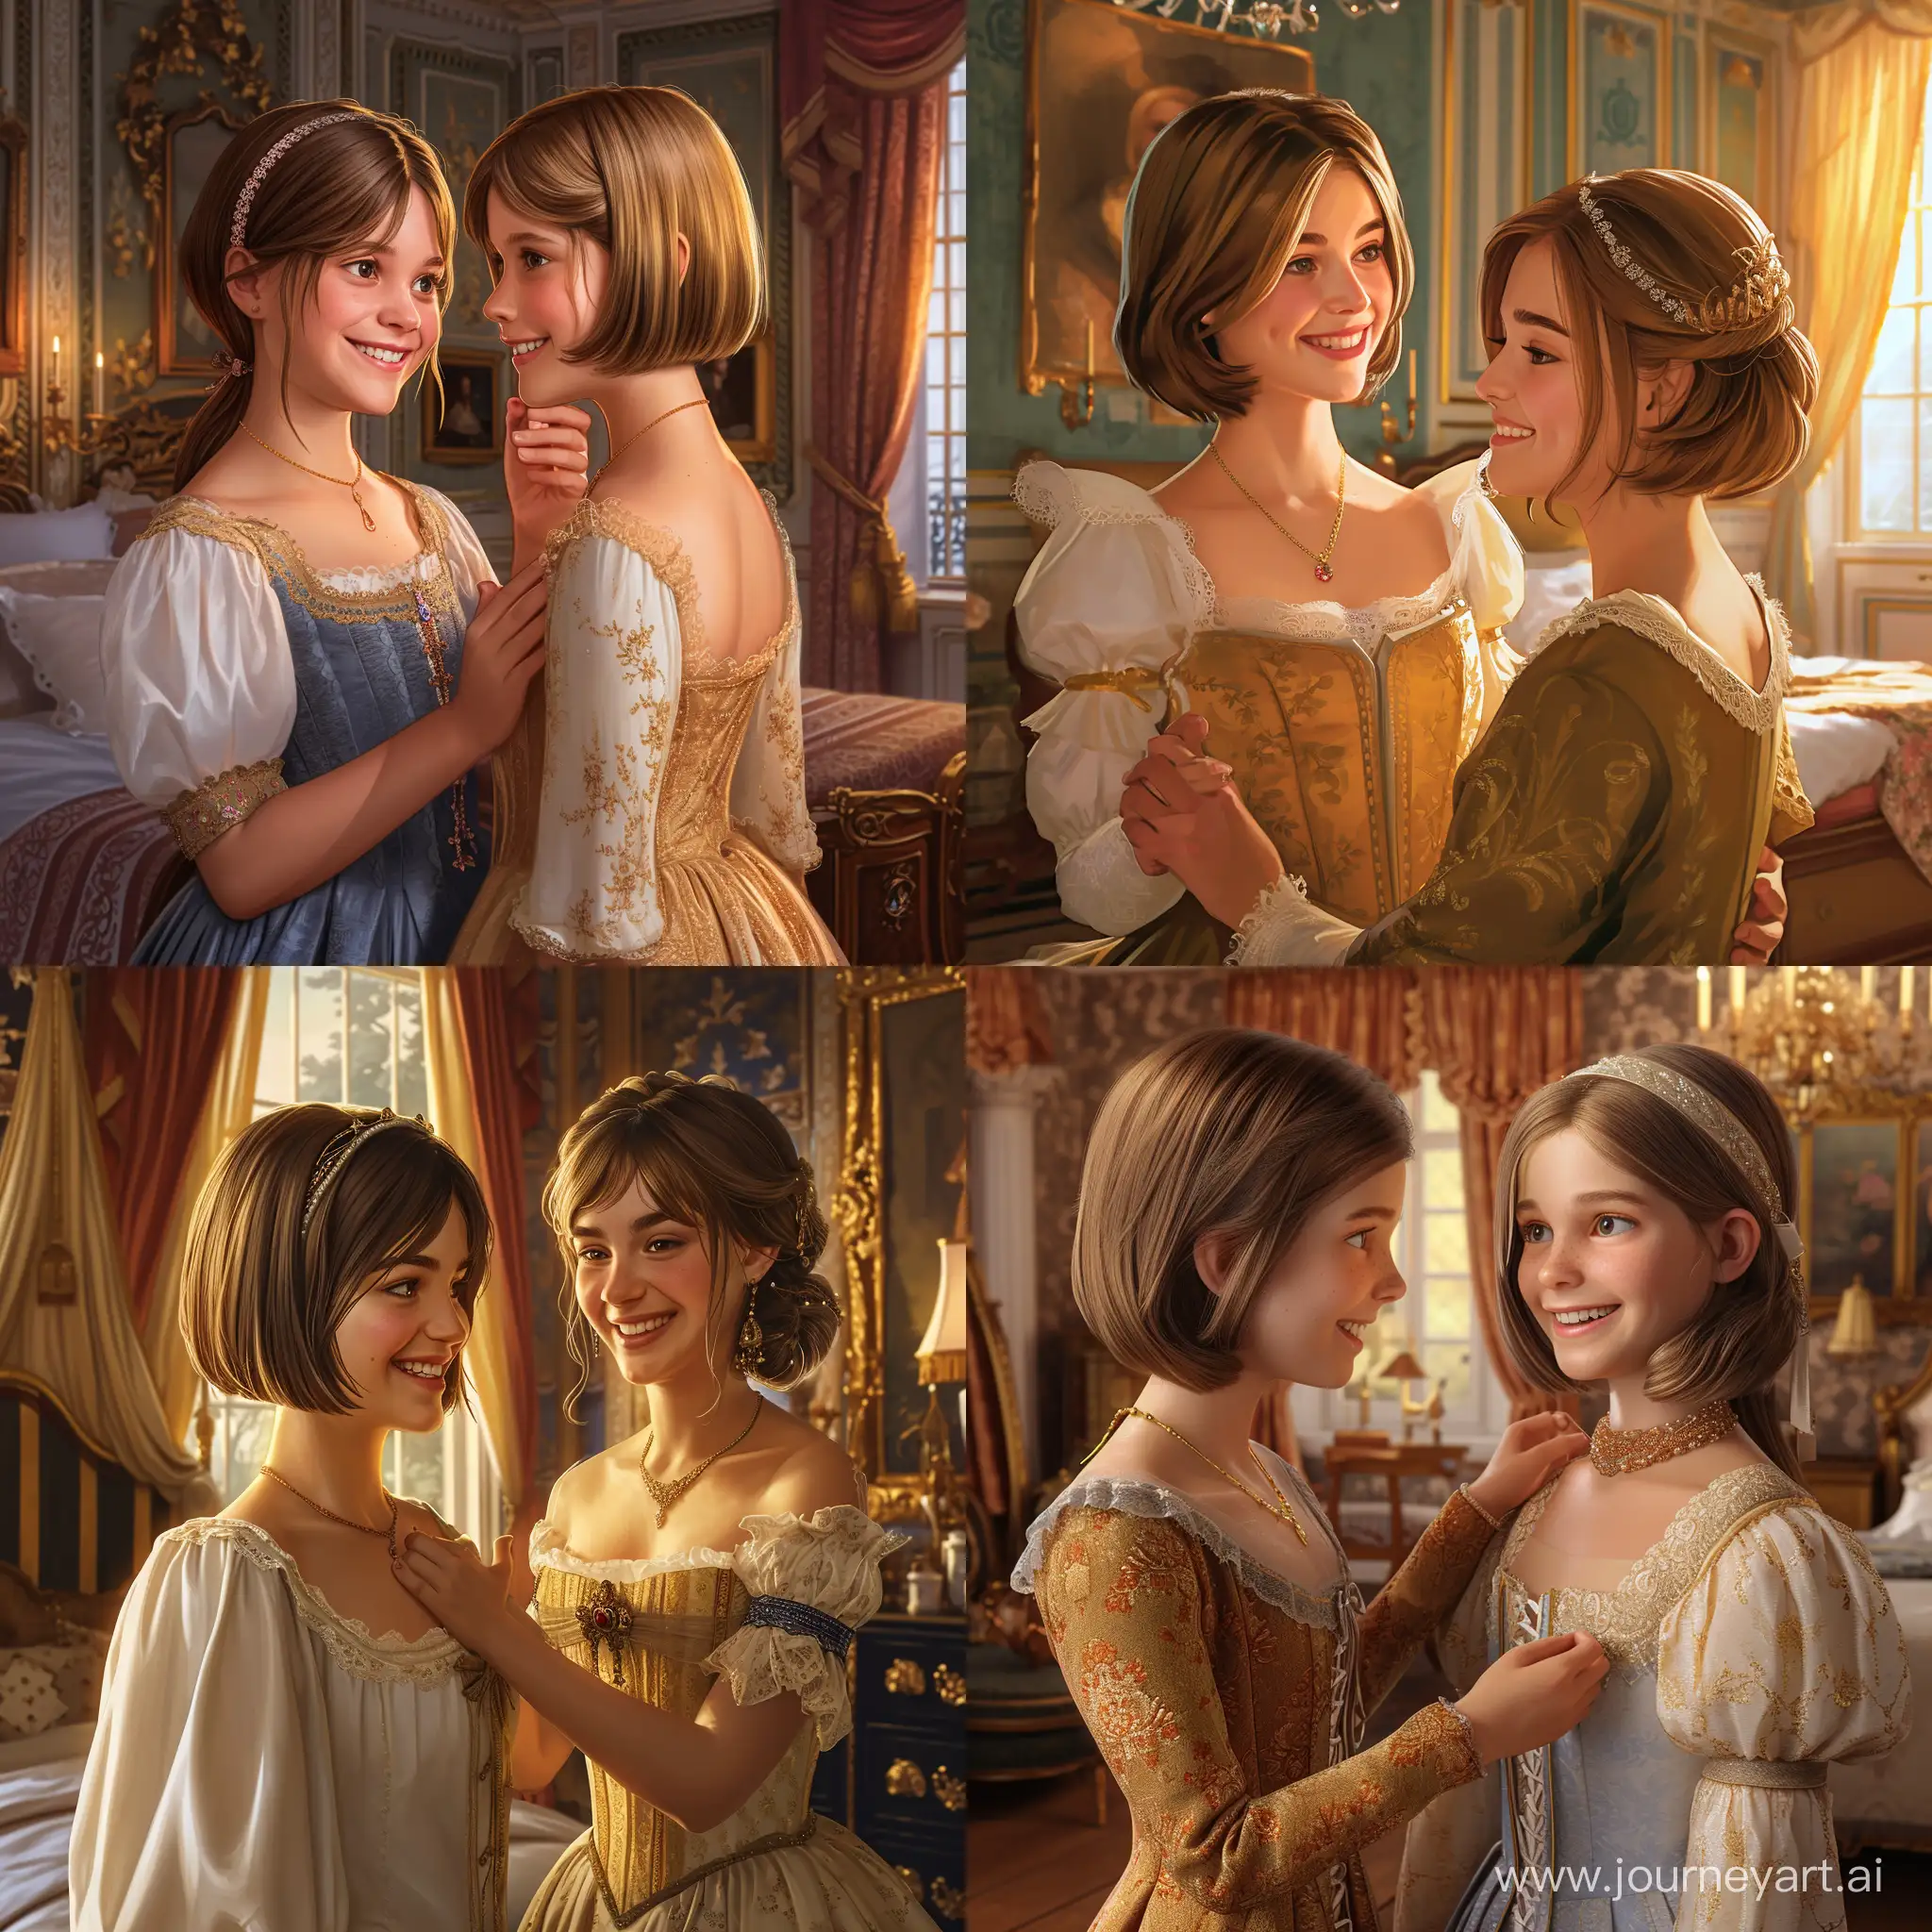 A princess with brown chin length hair, persuading her sister to get her hair cut short, the sister has longer blonde hair, bedroom interior, golden hour, regency dress, photorealistic, smiling